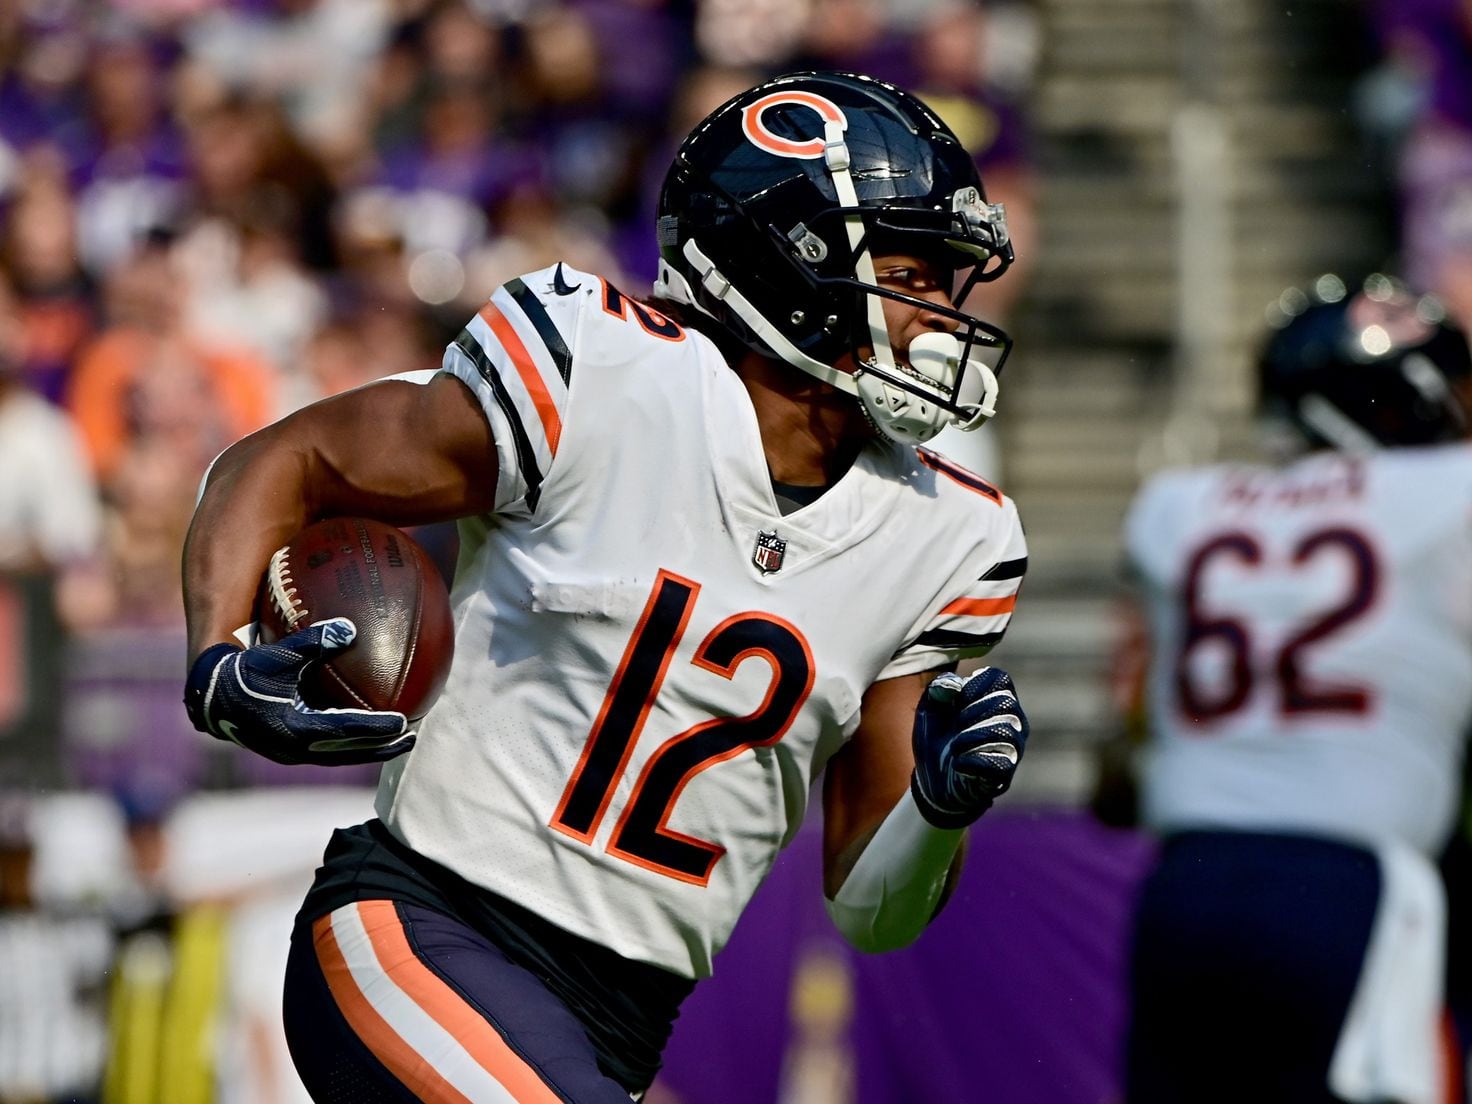 Bears Commanders: How to watch Thursday Night Football on TV, stream, date